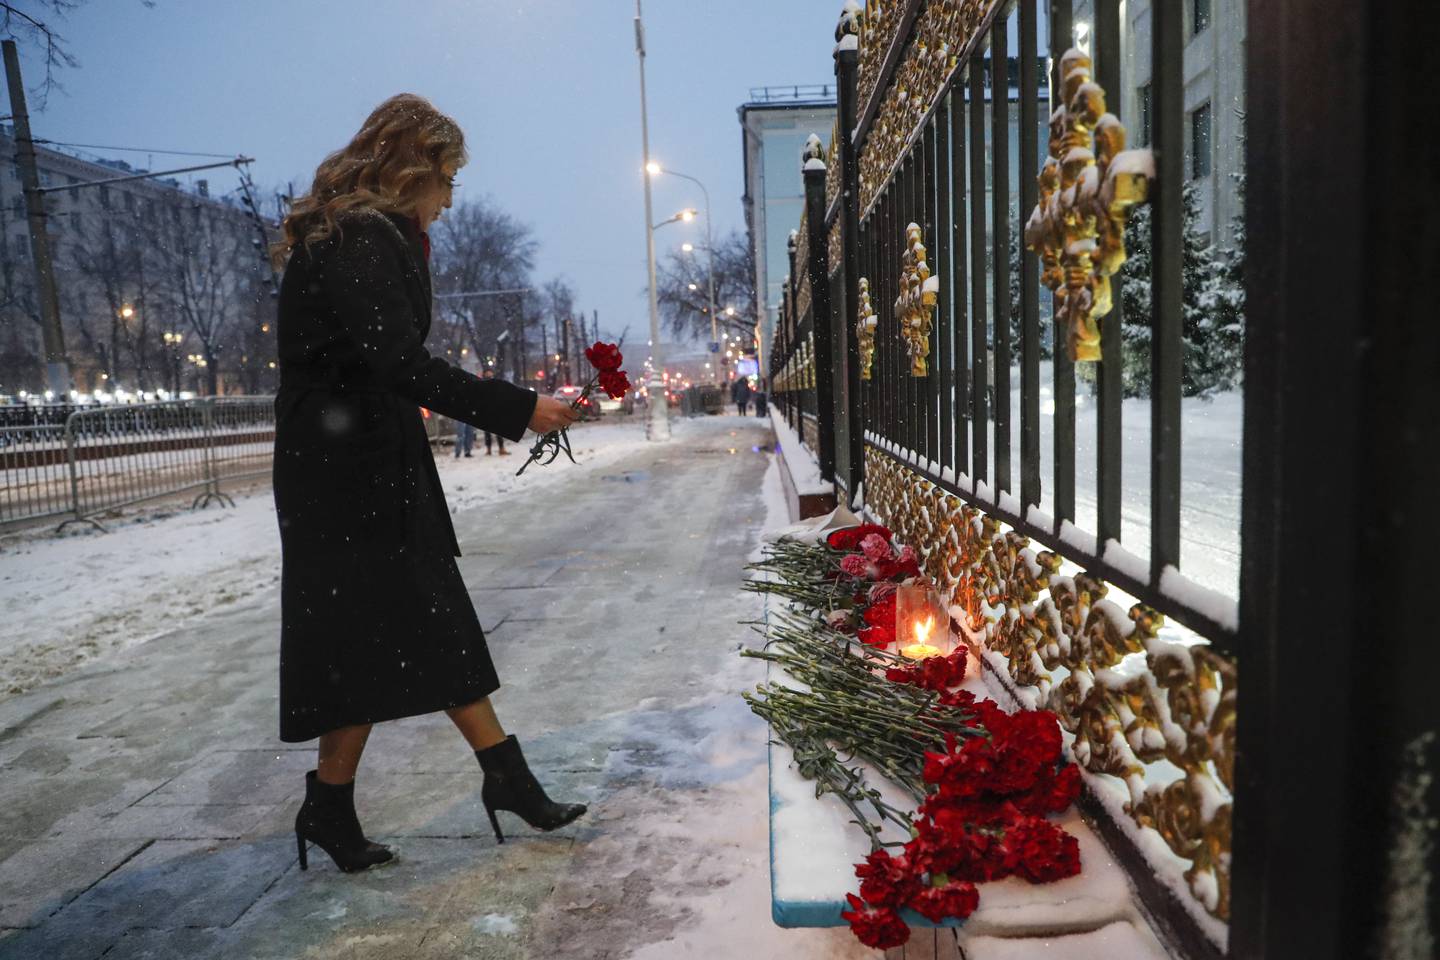 A woman places flowers at the entrance of the Kazakh embassy in Moscow, for the 164 people killed during the riots in Kazakhstan, in Russia, January 10. EPA